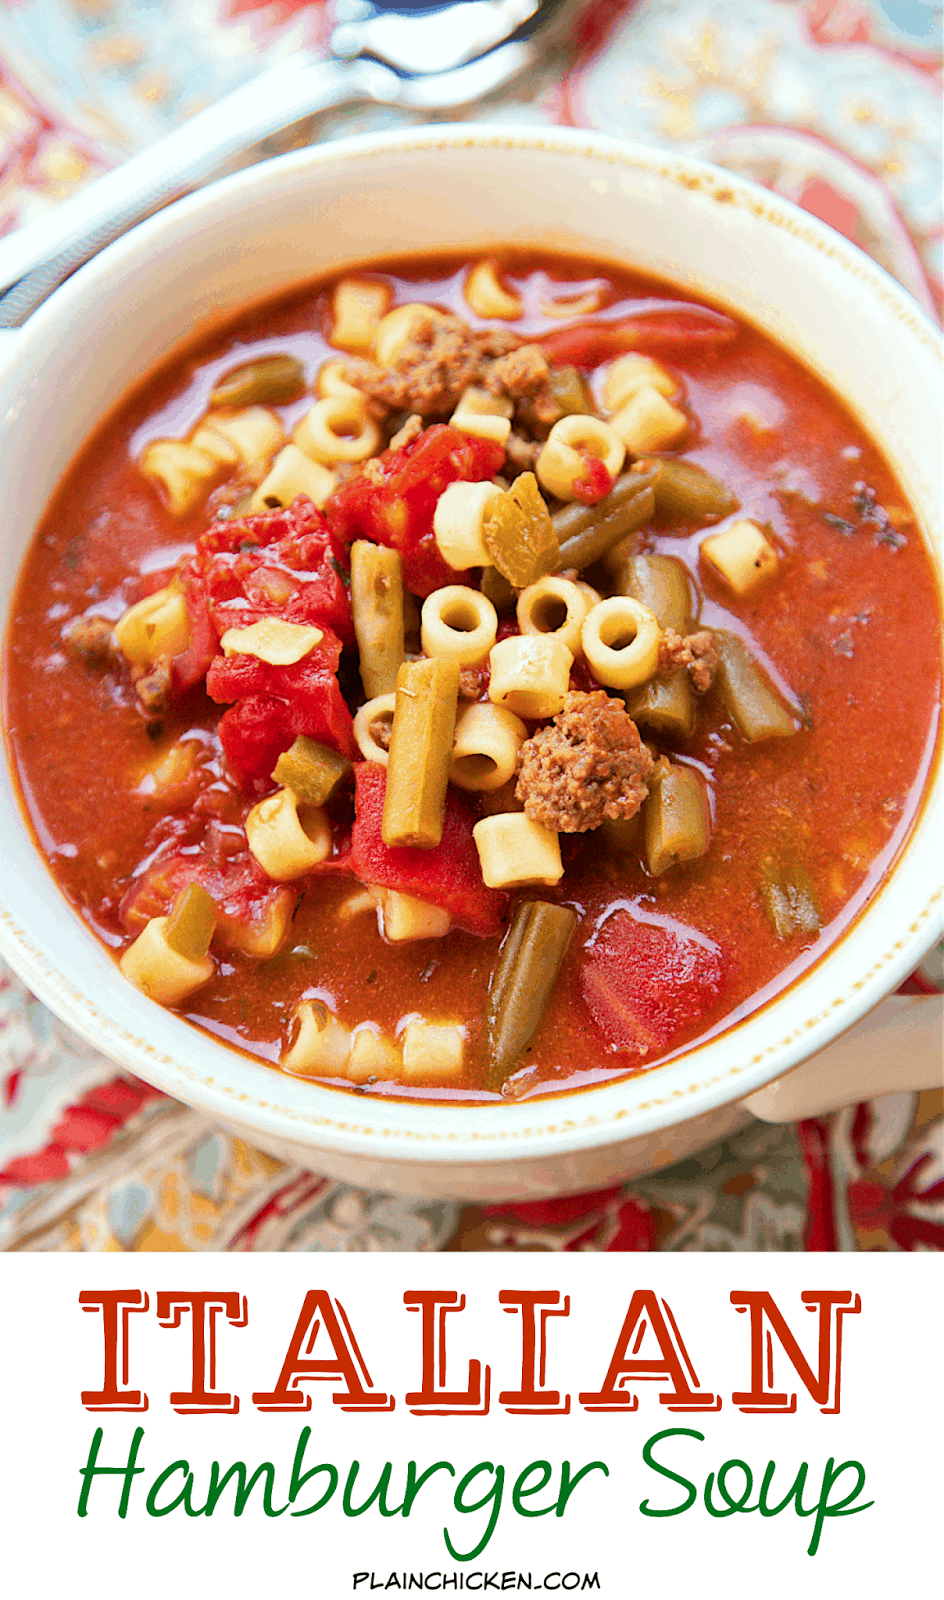 Italian Hamburger Soup - ground beef, peppers, stewed tomatoes, green beans, tomato sauce, oregano, basil and pasta - SO good! We ate this two days in a row. Makes a ton - freezes well. 